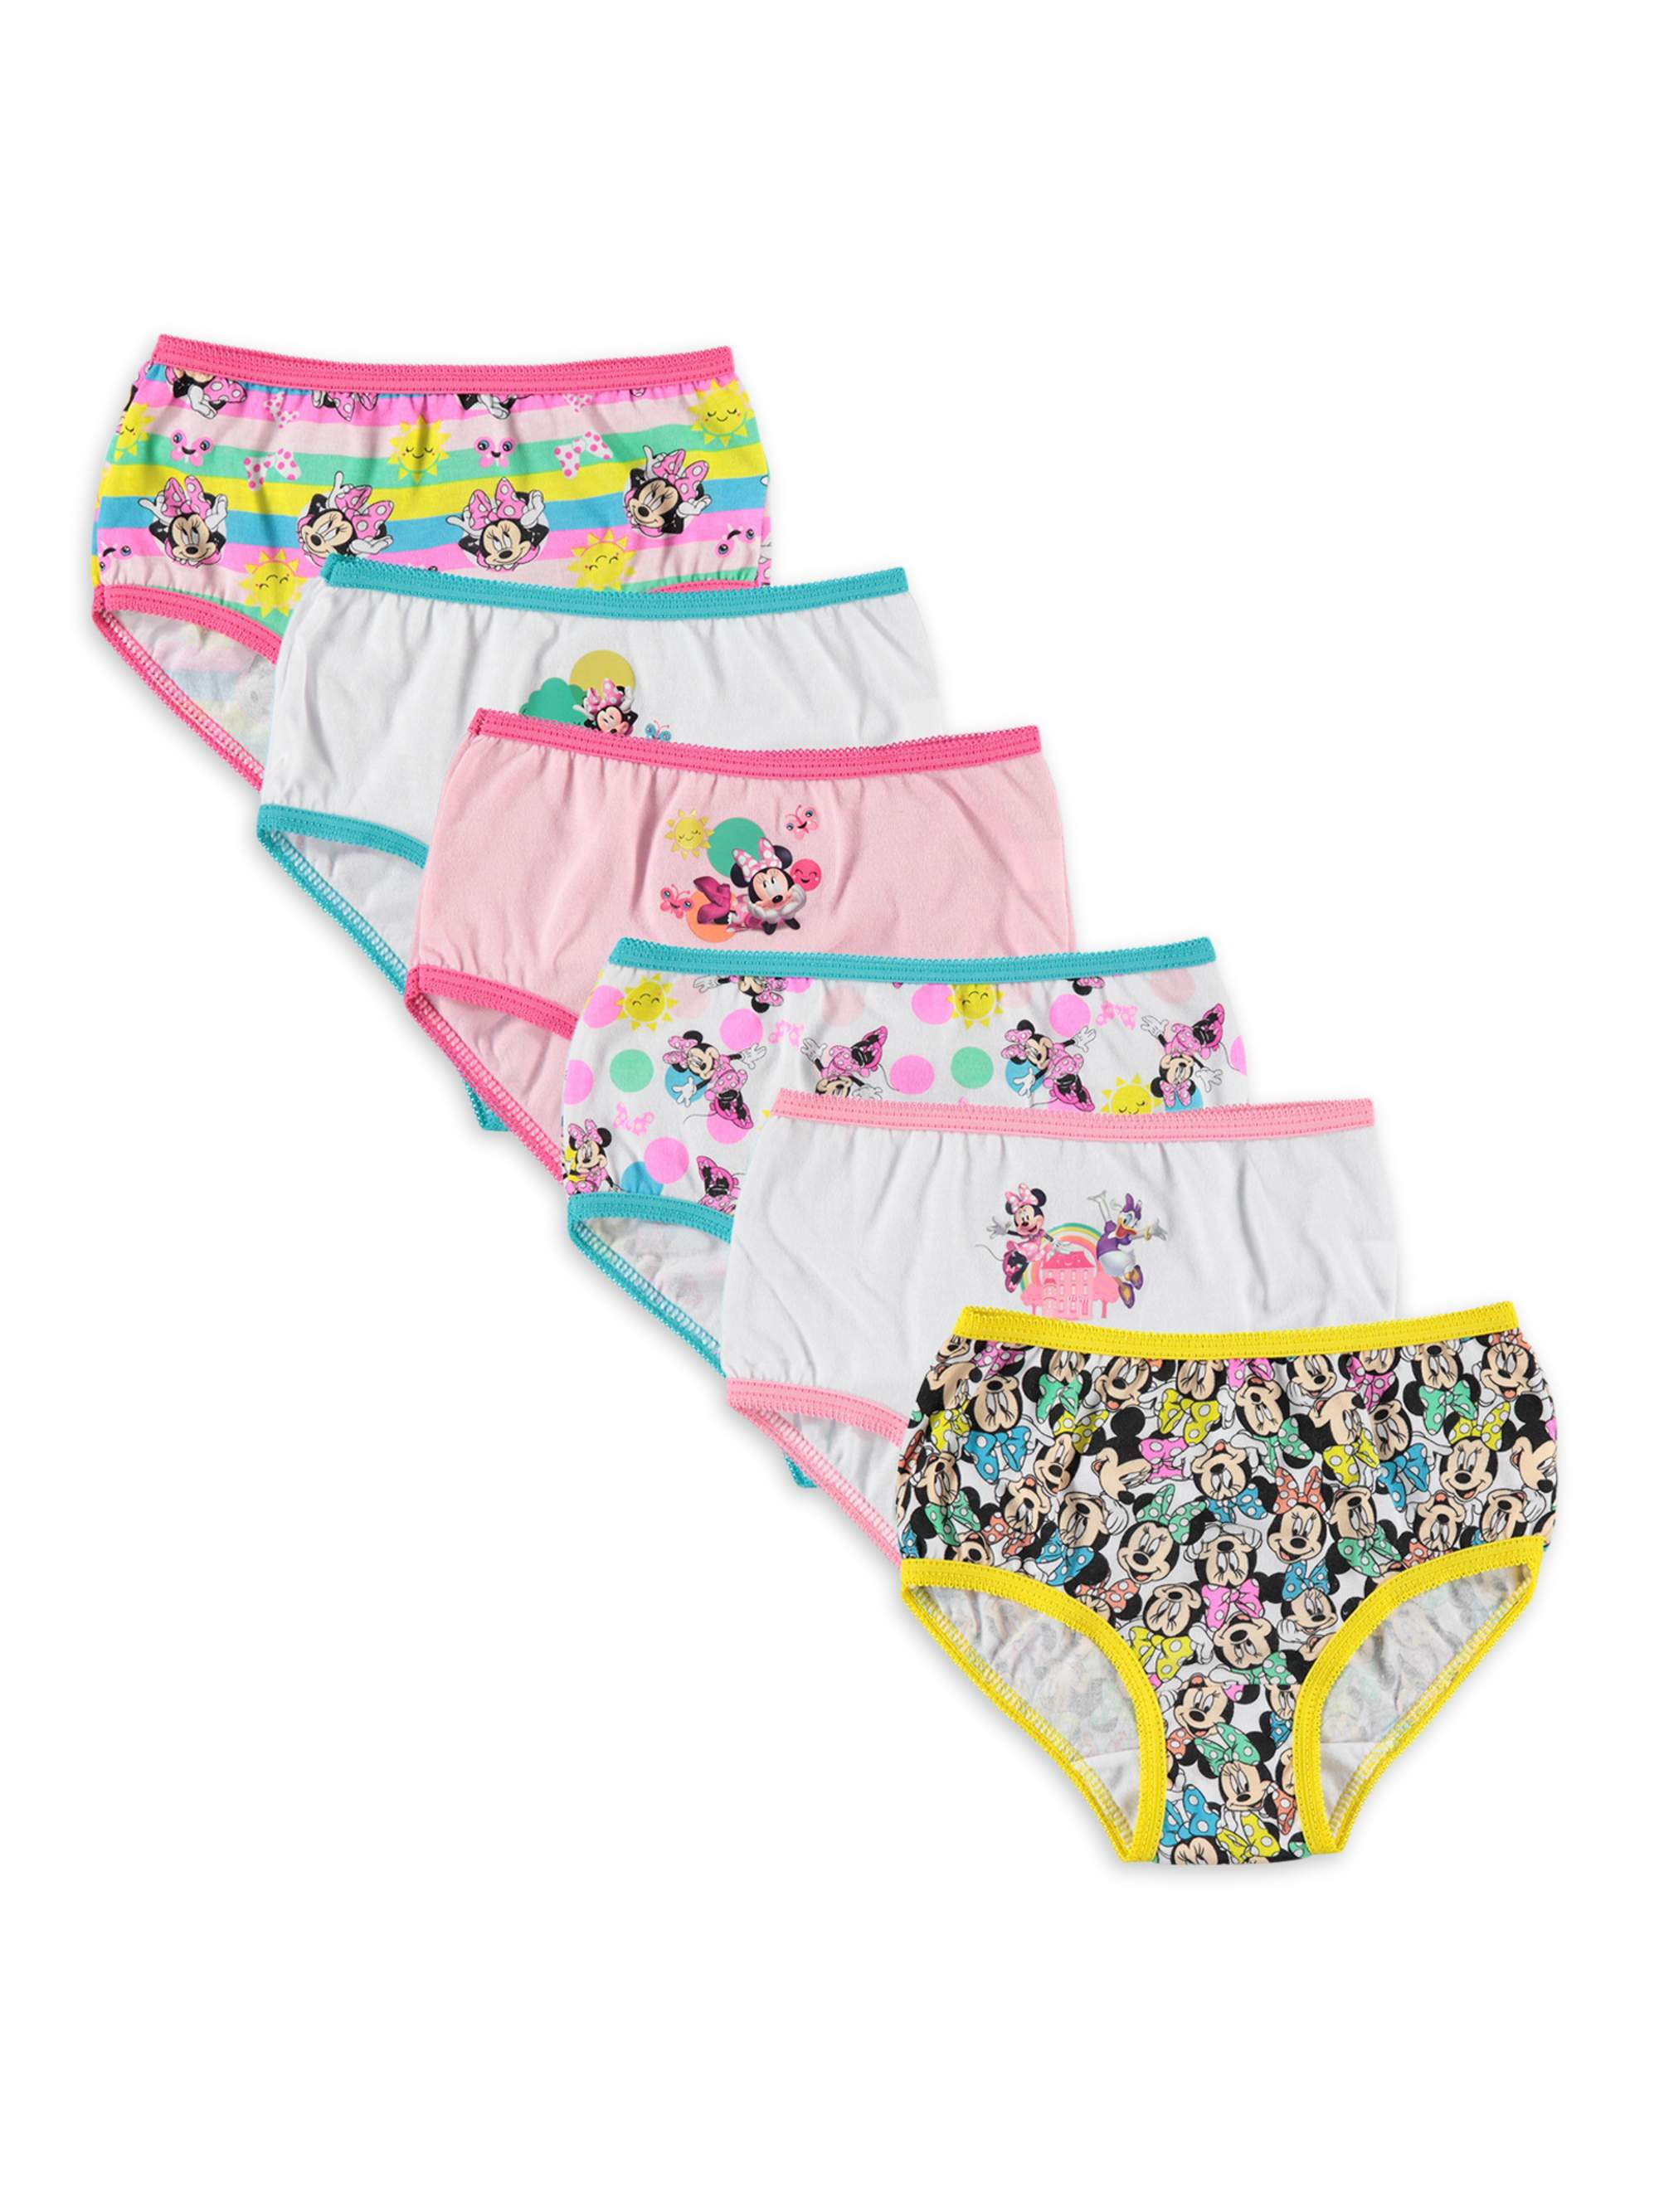 Minnie Mouse Toddler Girls' Panties, 6 pack Sizes 2T-4T